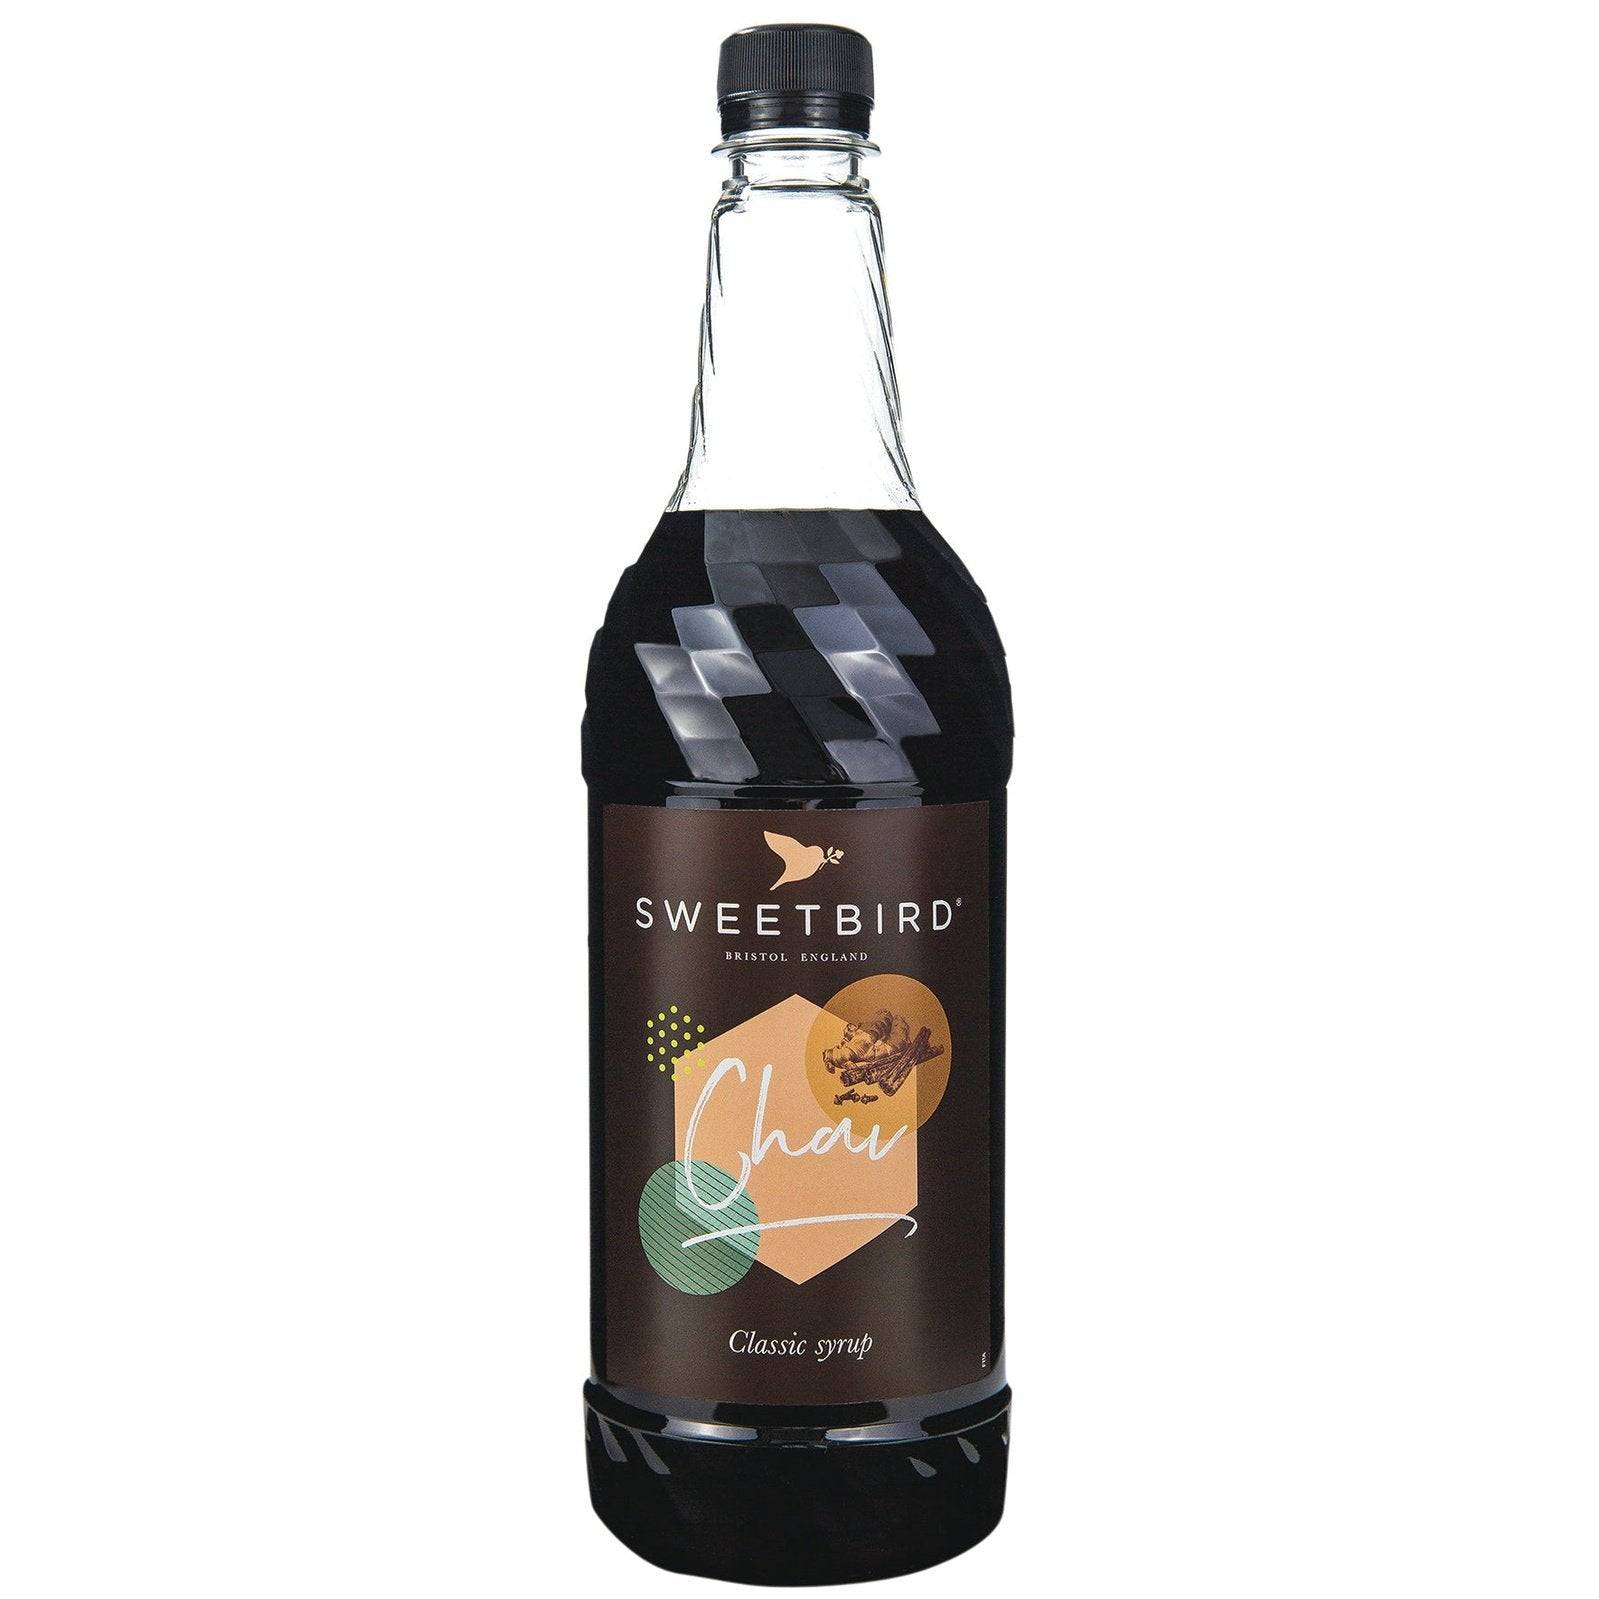 Sweetbird - Chai Syrup 1L